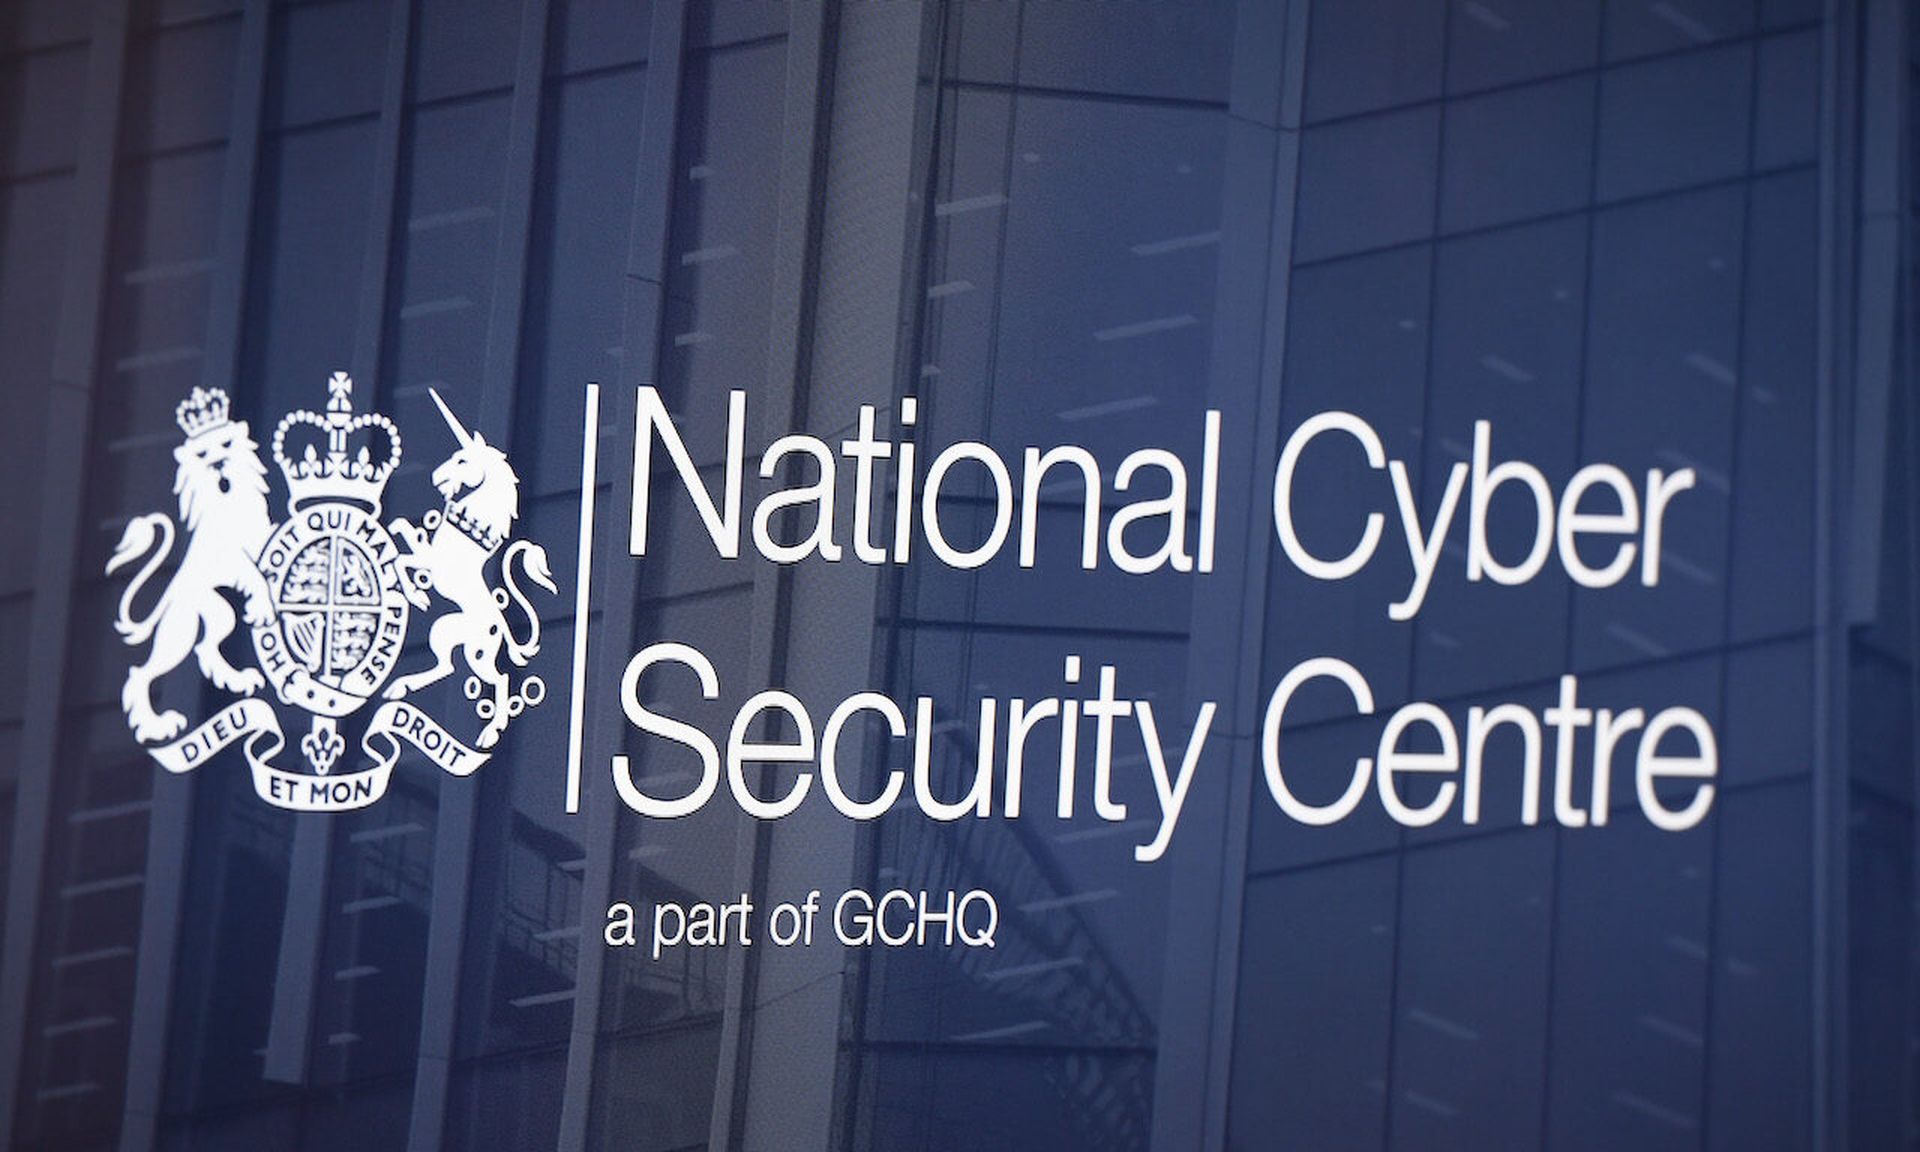 Today’s columnist, Jonathan Webster of CybSafe, writes that businesses should take a close look at the recommended behaviors for security awareness listed by the UK’s National Cyber Security Centre. (Photo by Carl Court/Getty Images)